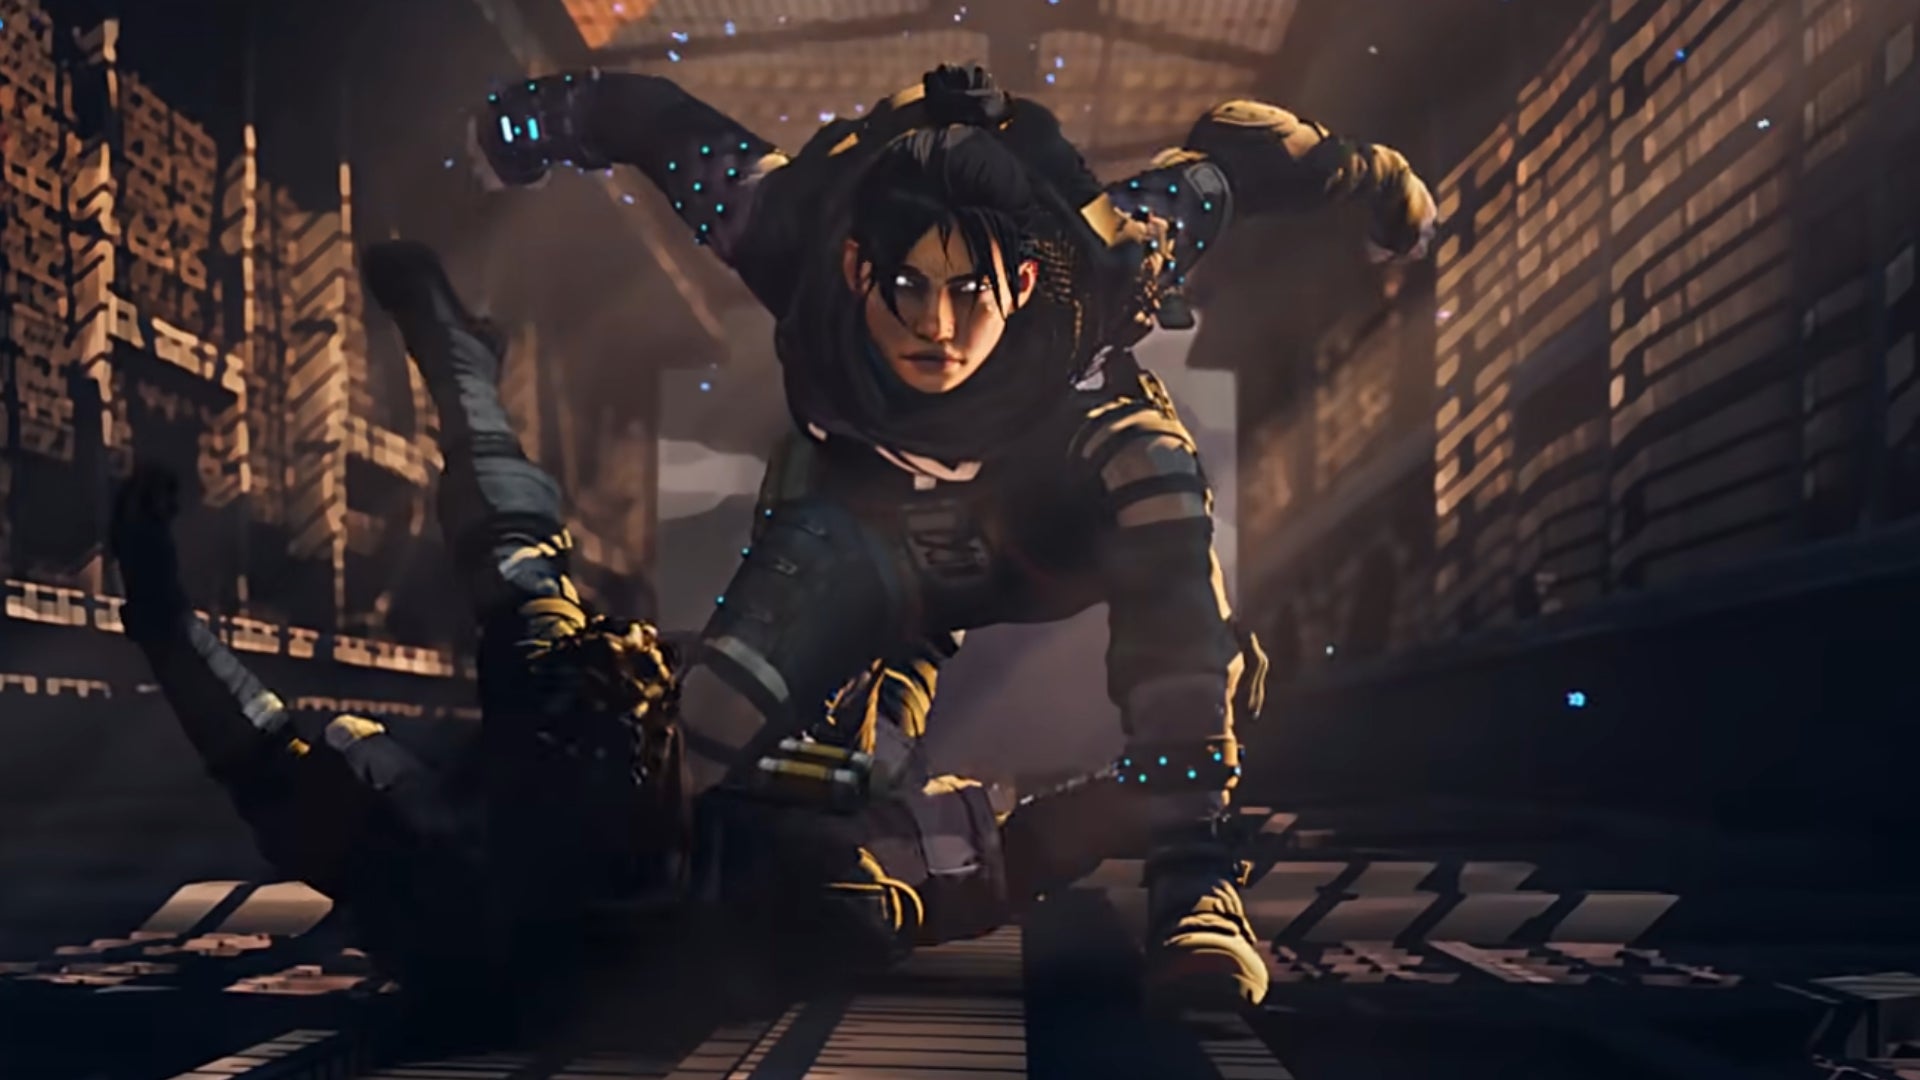 Wraith knocks out another player in Apex Legends.